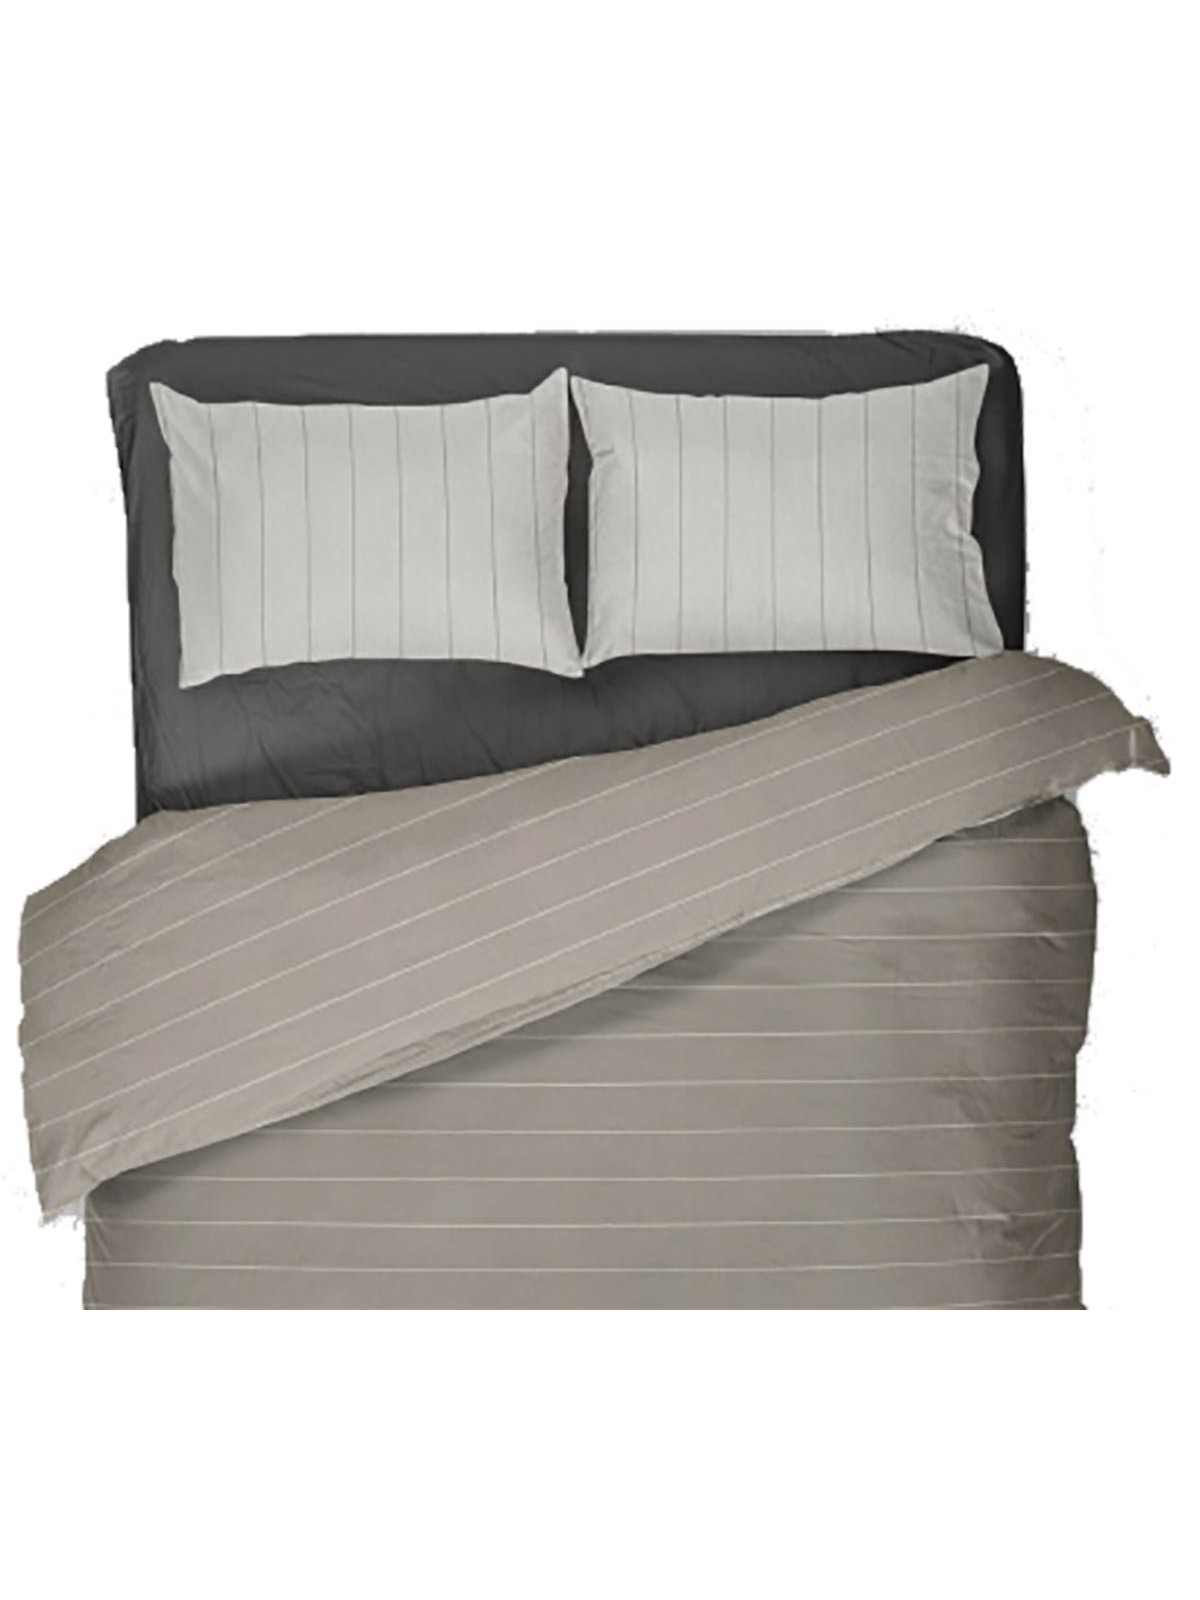 Full bed Linen printed Cotton striped